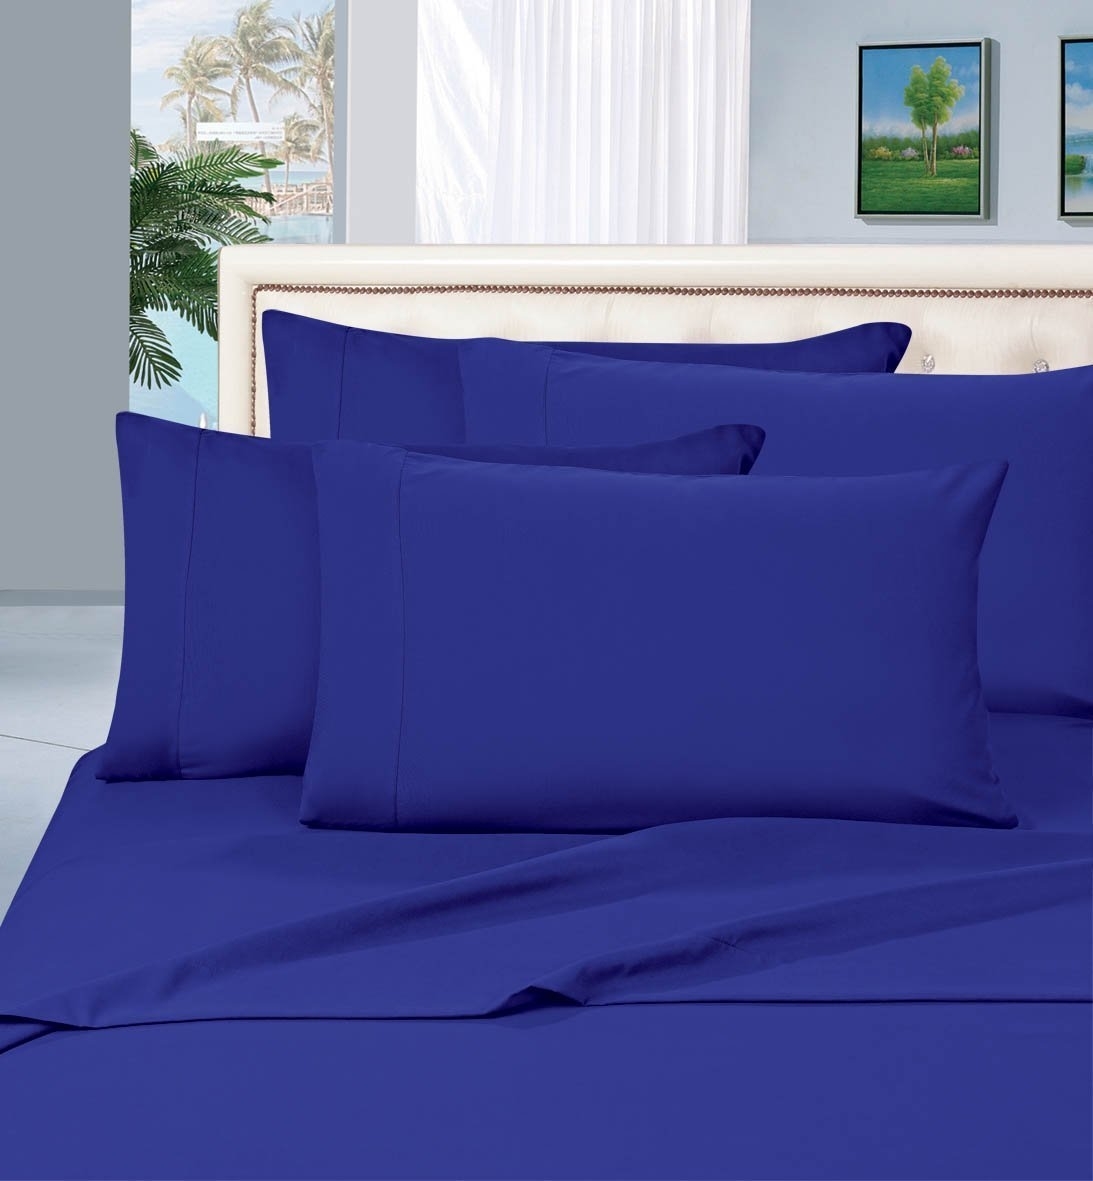 Elegant Comfort 1500 Series Wrinkle Resistant Egyptian Quality Hypoallergenic Ultra Soft Luxury 4-piece Bed Sheet Set, King, Royal Blue